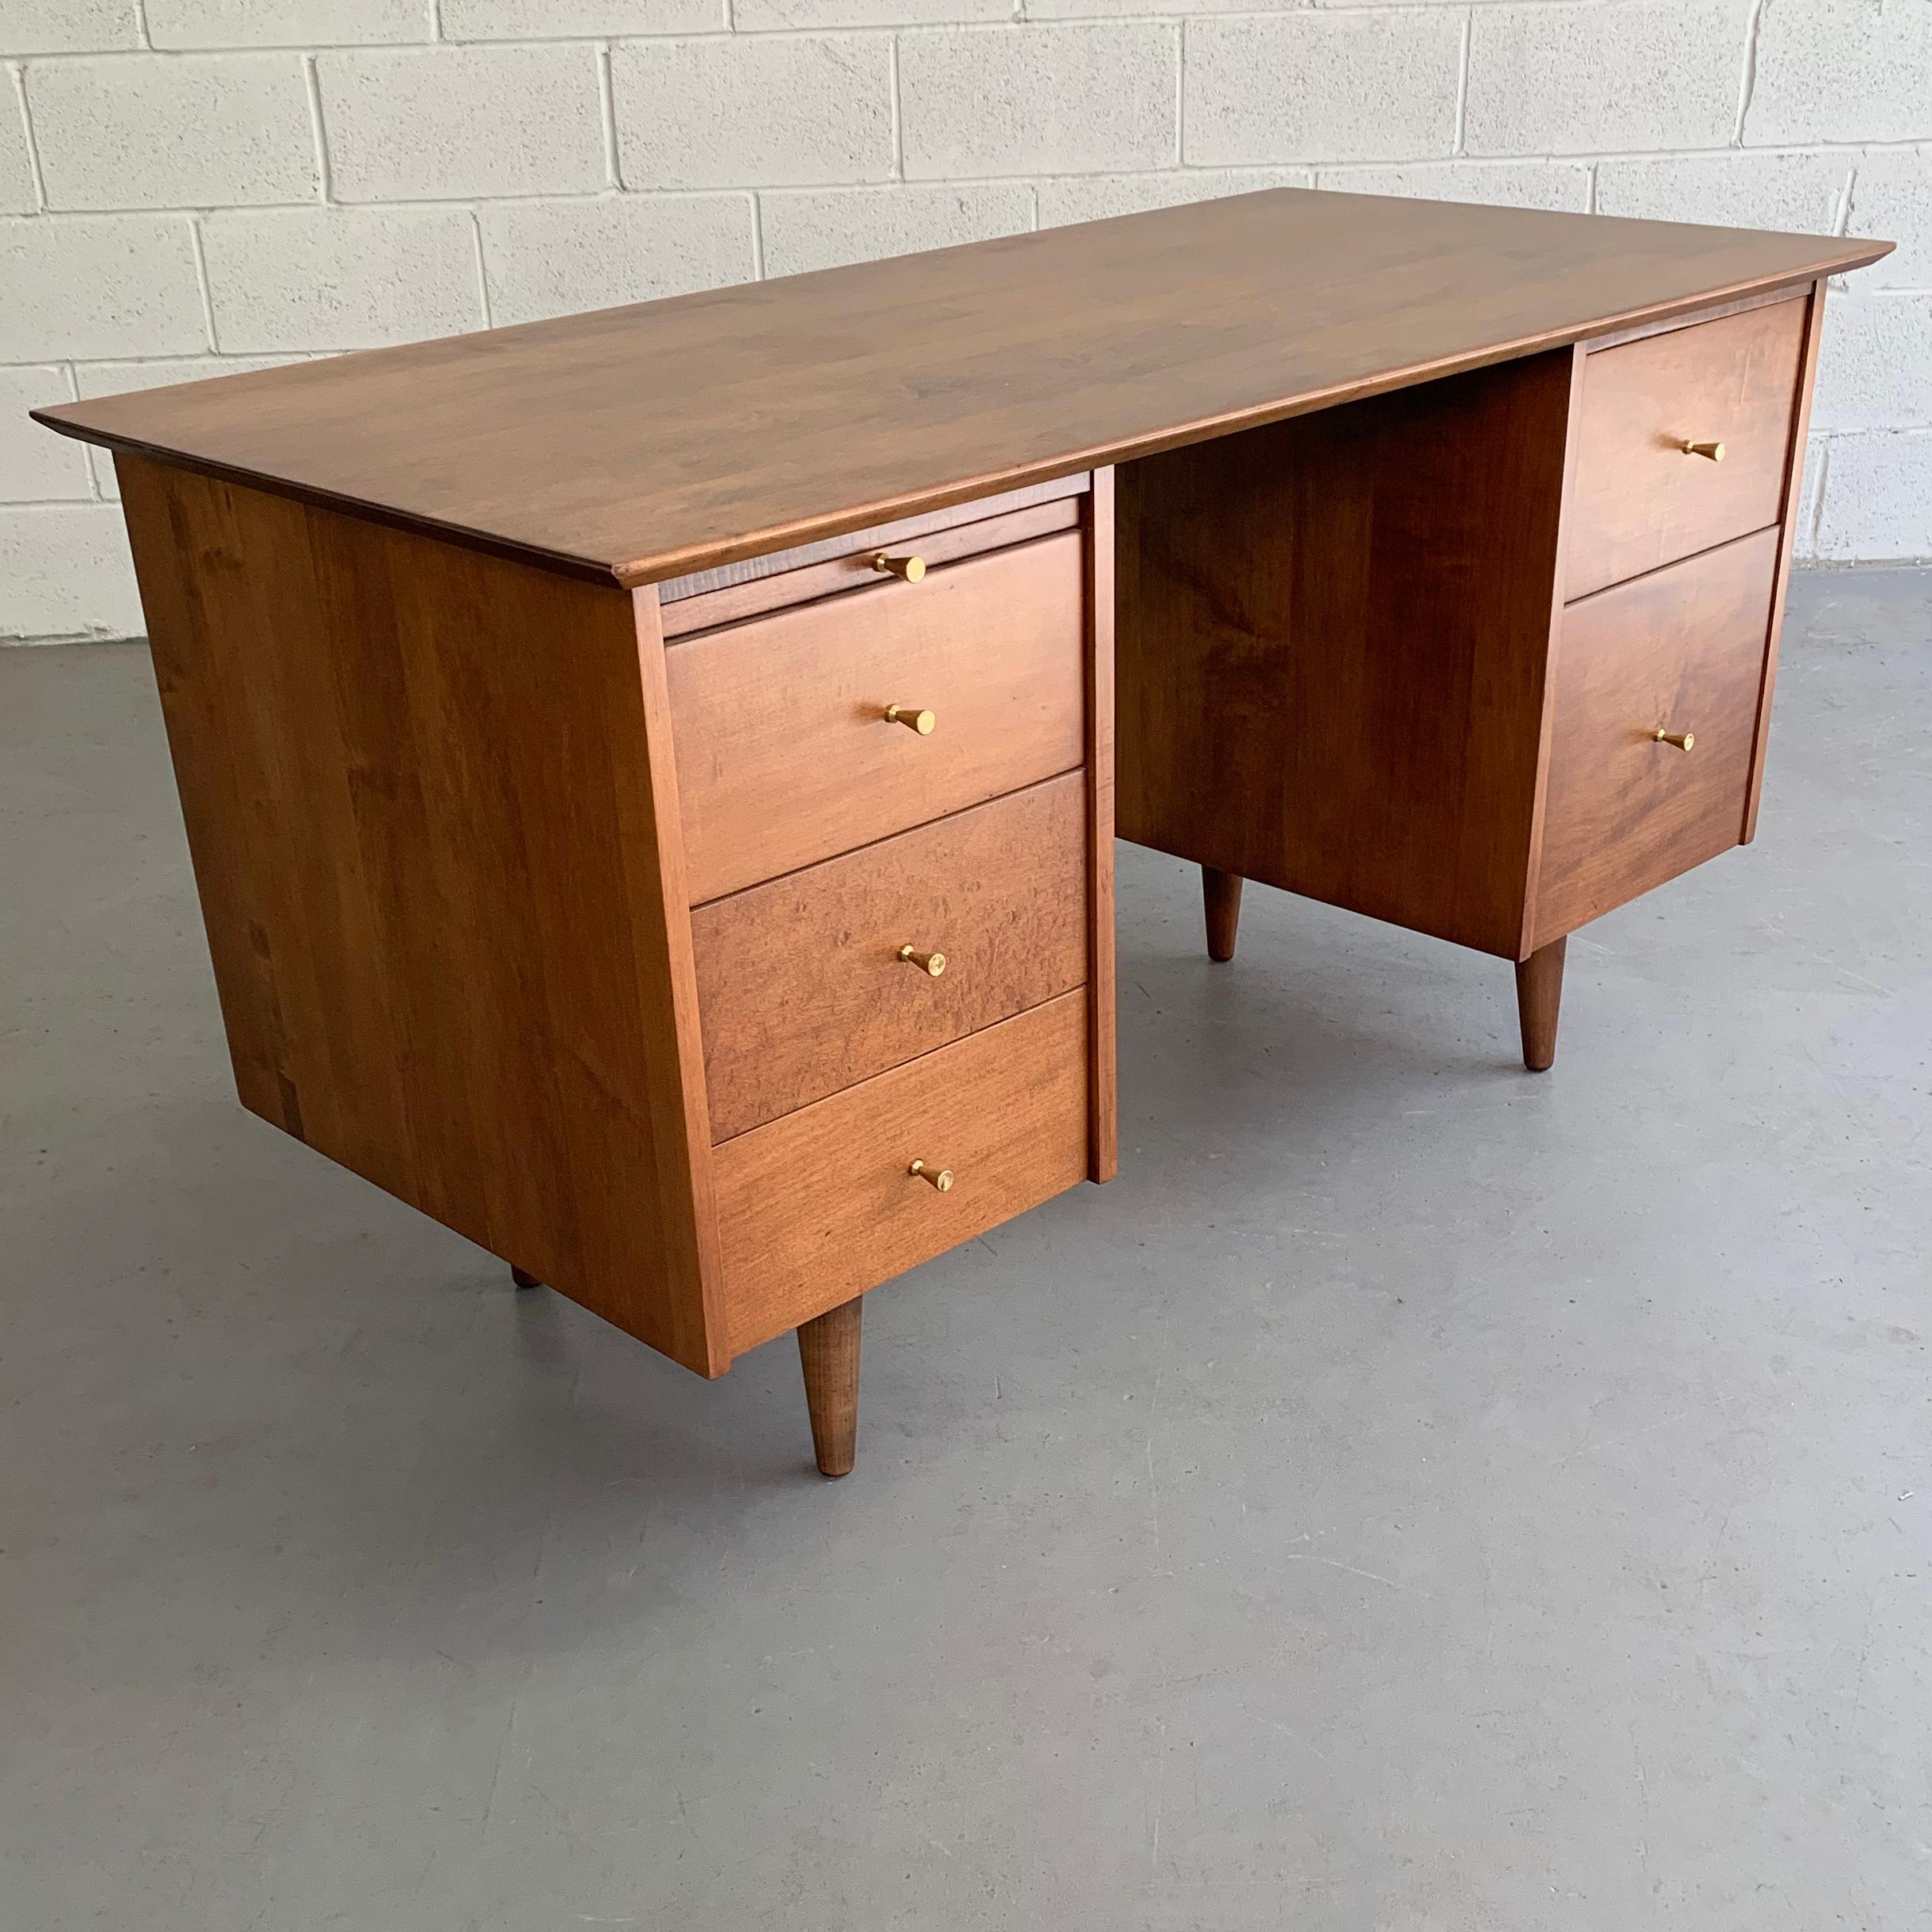 Mid-Century Modern, medium-tone, maple desk by Paul McCobb, Planner Group for Winchendon features drawers on both sides and pullout / pull-out ledge with signature McCobb brass hourglass pulls.